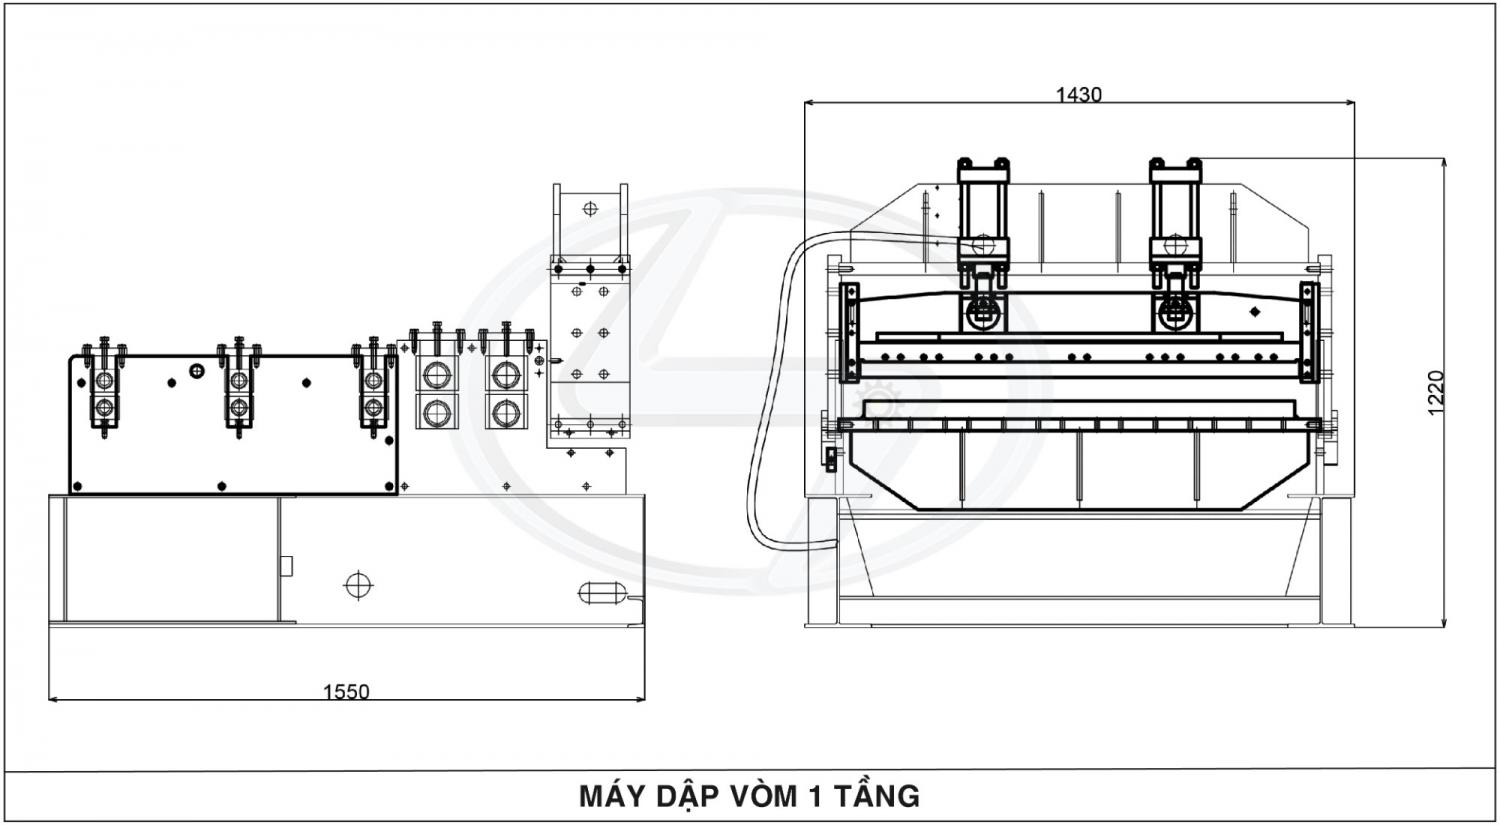 Saigon Machine, SGM, Industrial, Metallic, Steel, Roll, Forming, Machine, Tole, Iron, Pressing, Curve, Flip, Head, Stamping, Dome, Single, Double, Lay